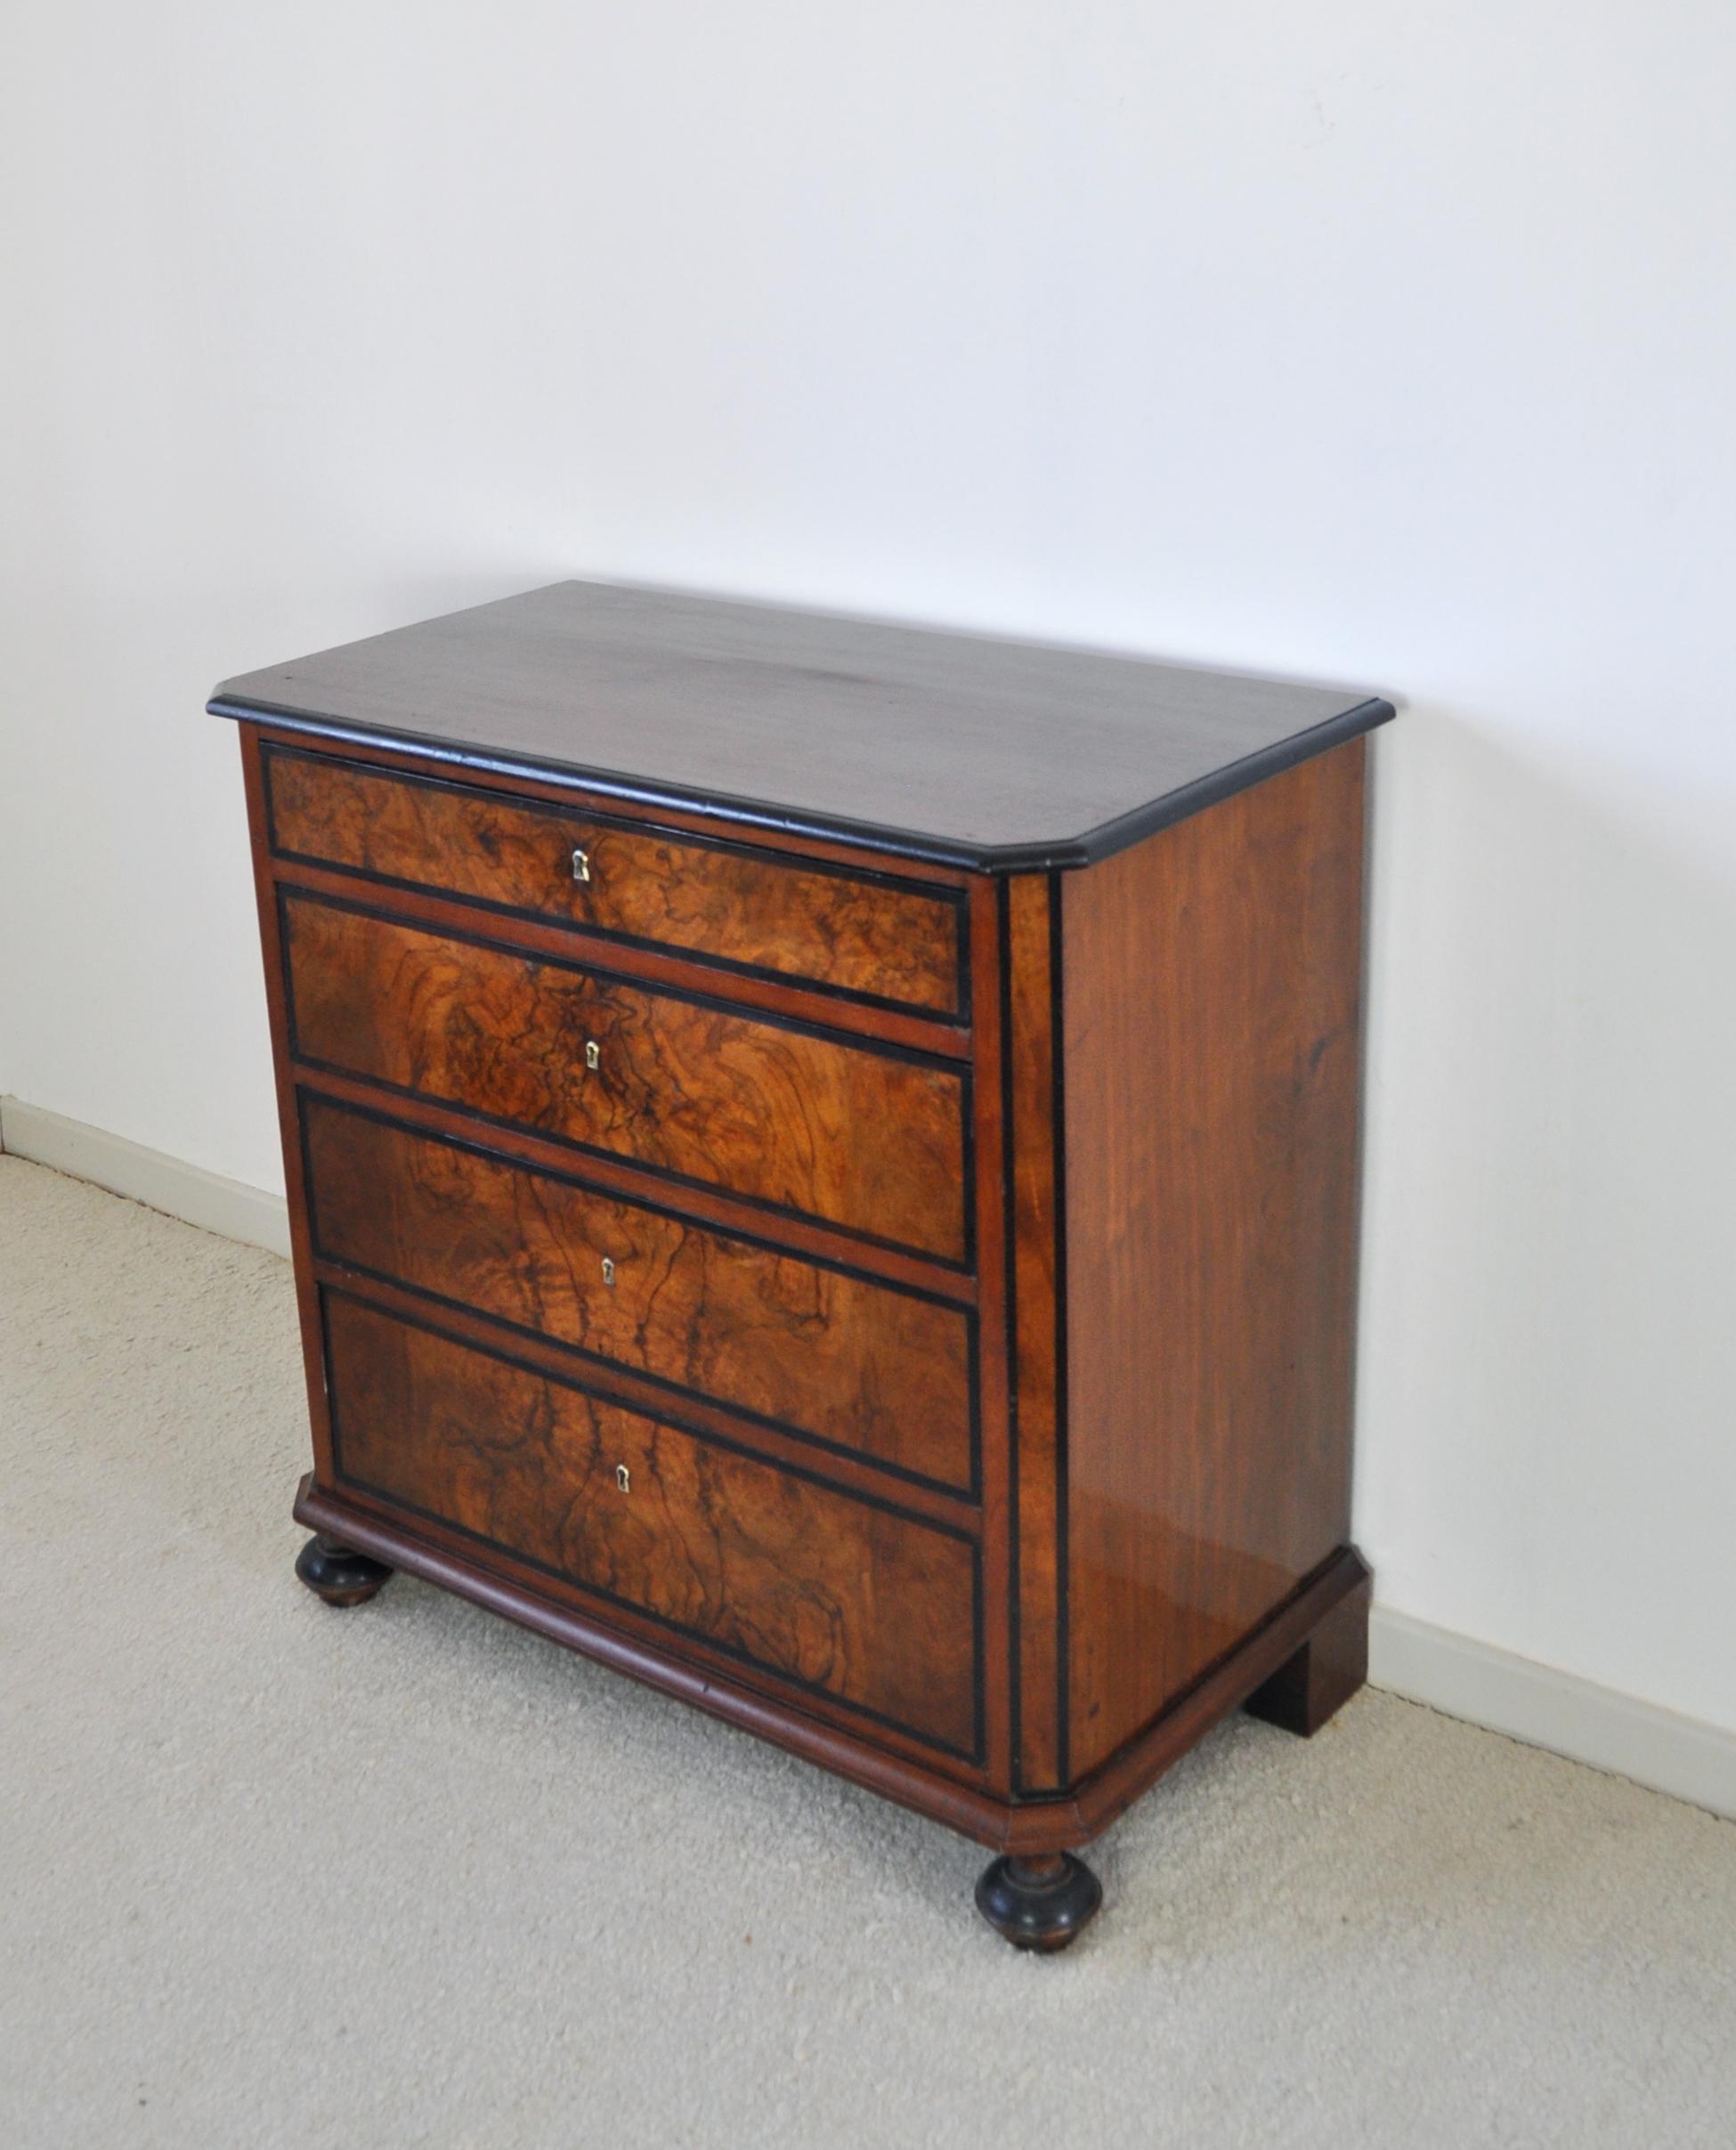 Antique Scandinavian Chest of Drawers in Walnut & Mahogany with Ebonized Details In Good Condition For Sale In Vordingborg, DK